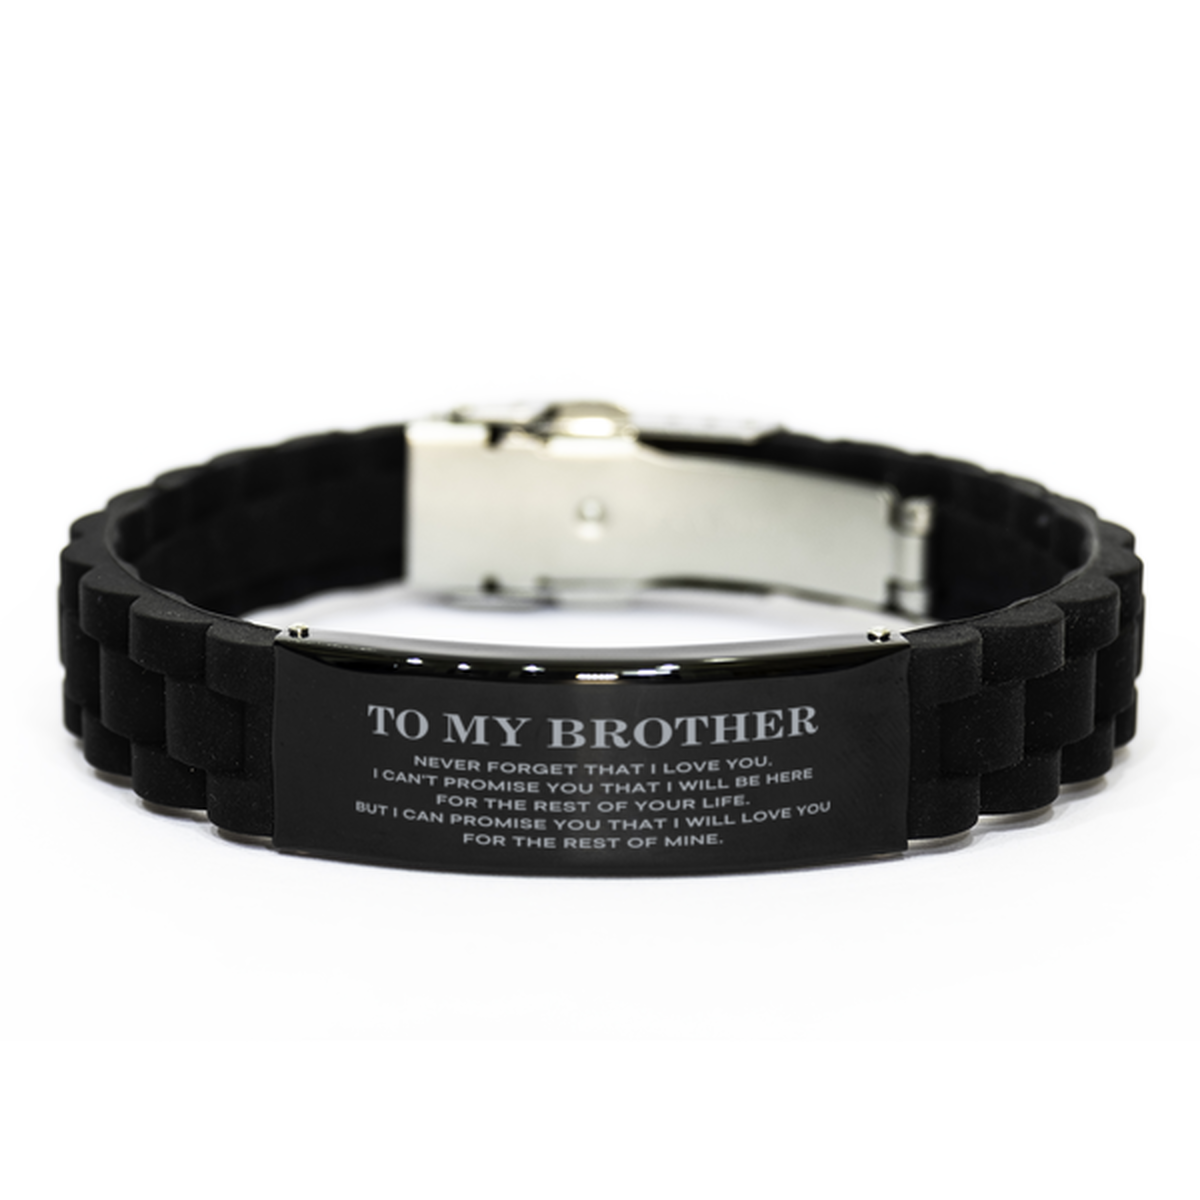 To My Brother Gifts, I will love you for the rest of mine, Love Brother Bracelet, Birthday Christmas Unique Black Glidelock Clasp Bracelet For Brother